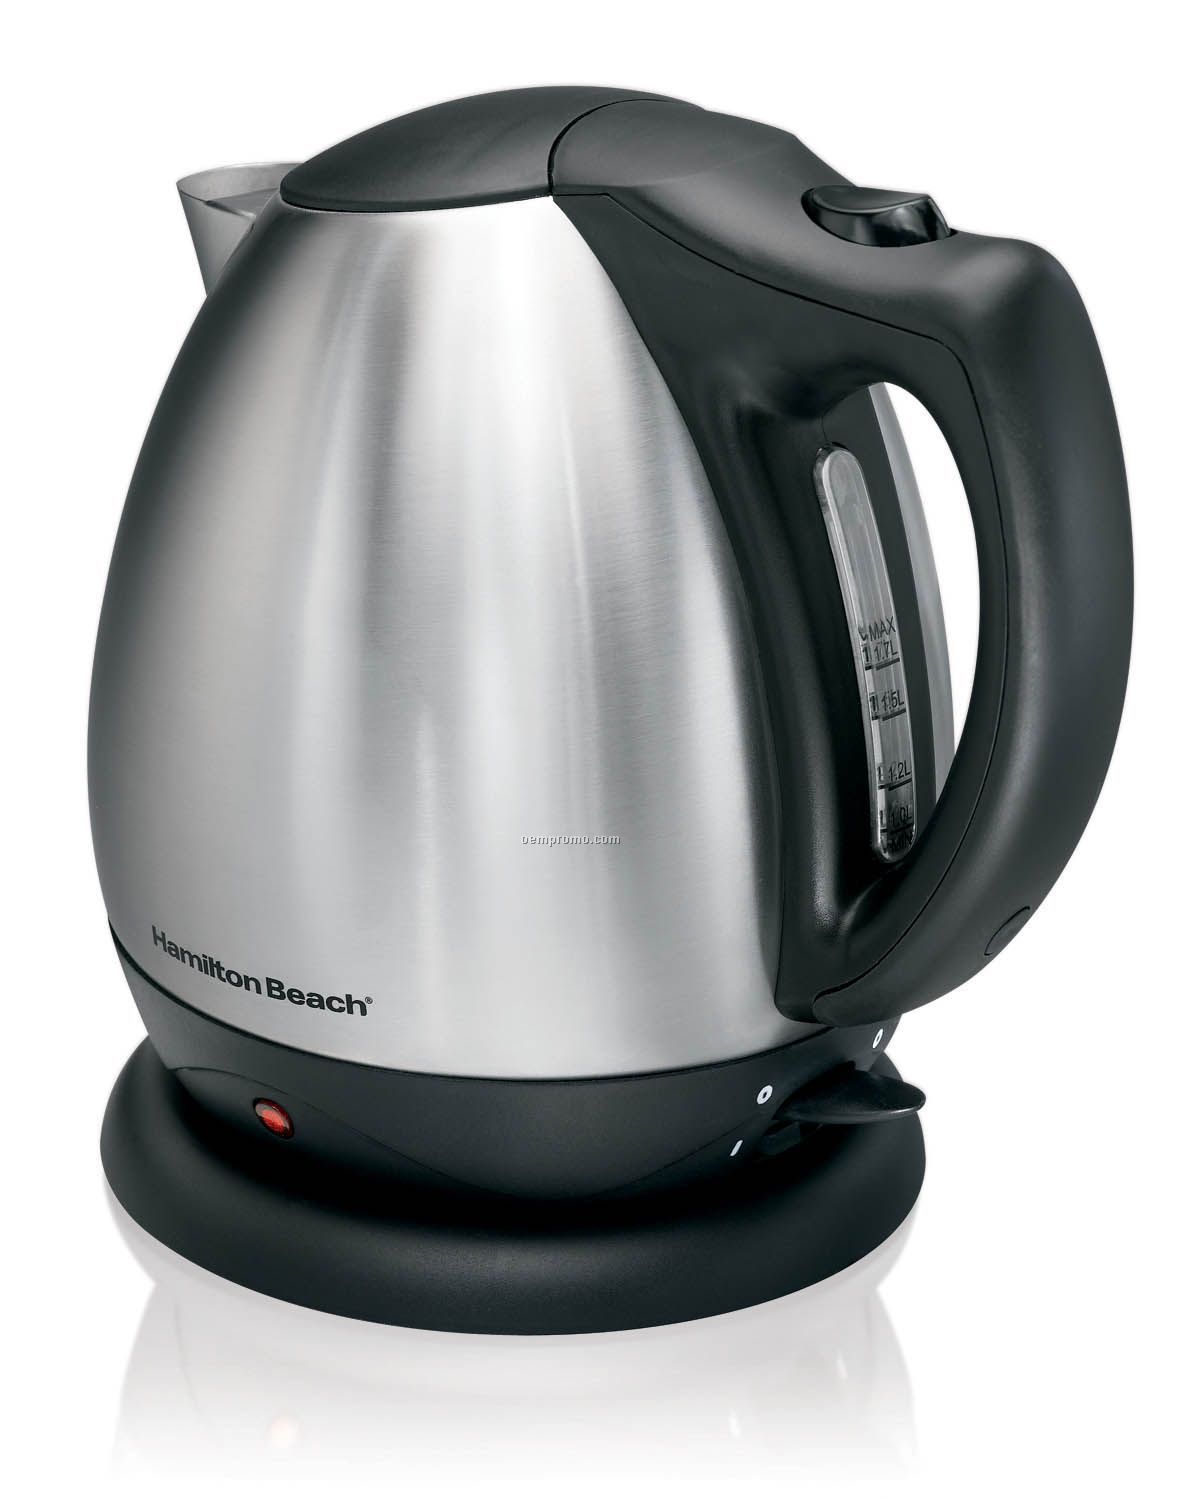 Hamilton Beach Stainless Steel 10 Cup Electric Kettle